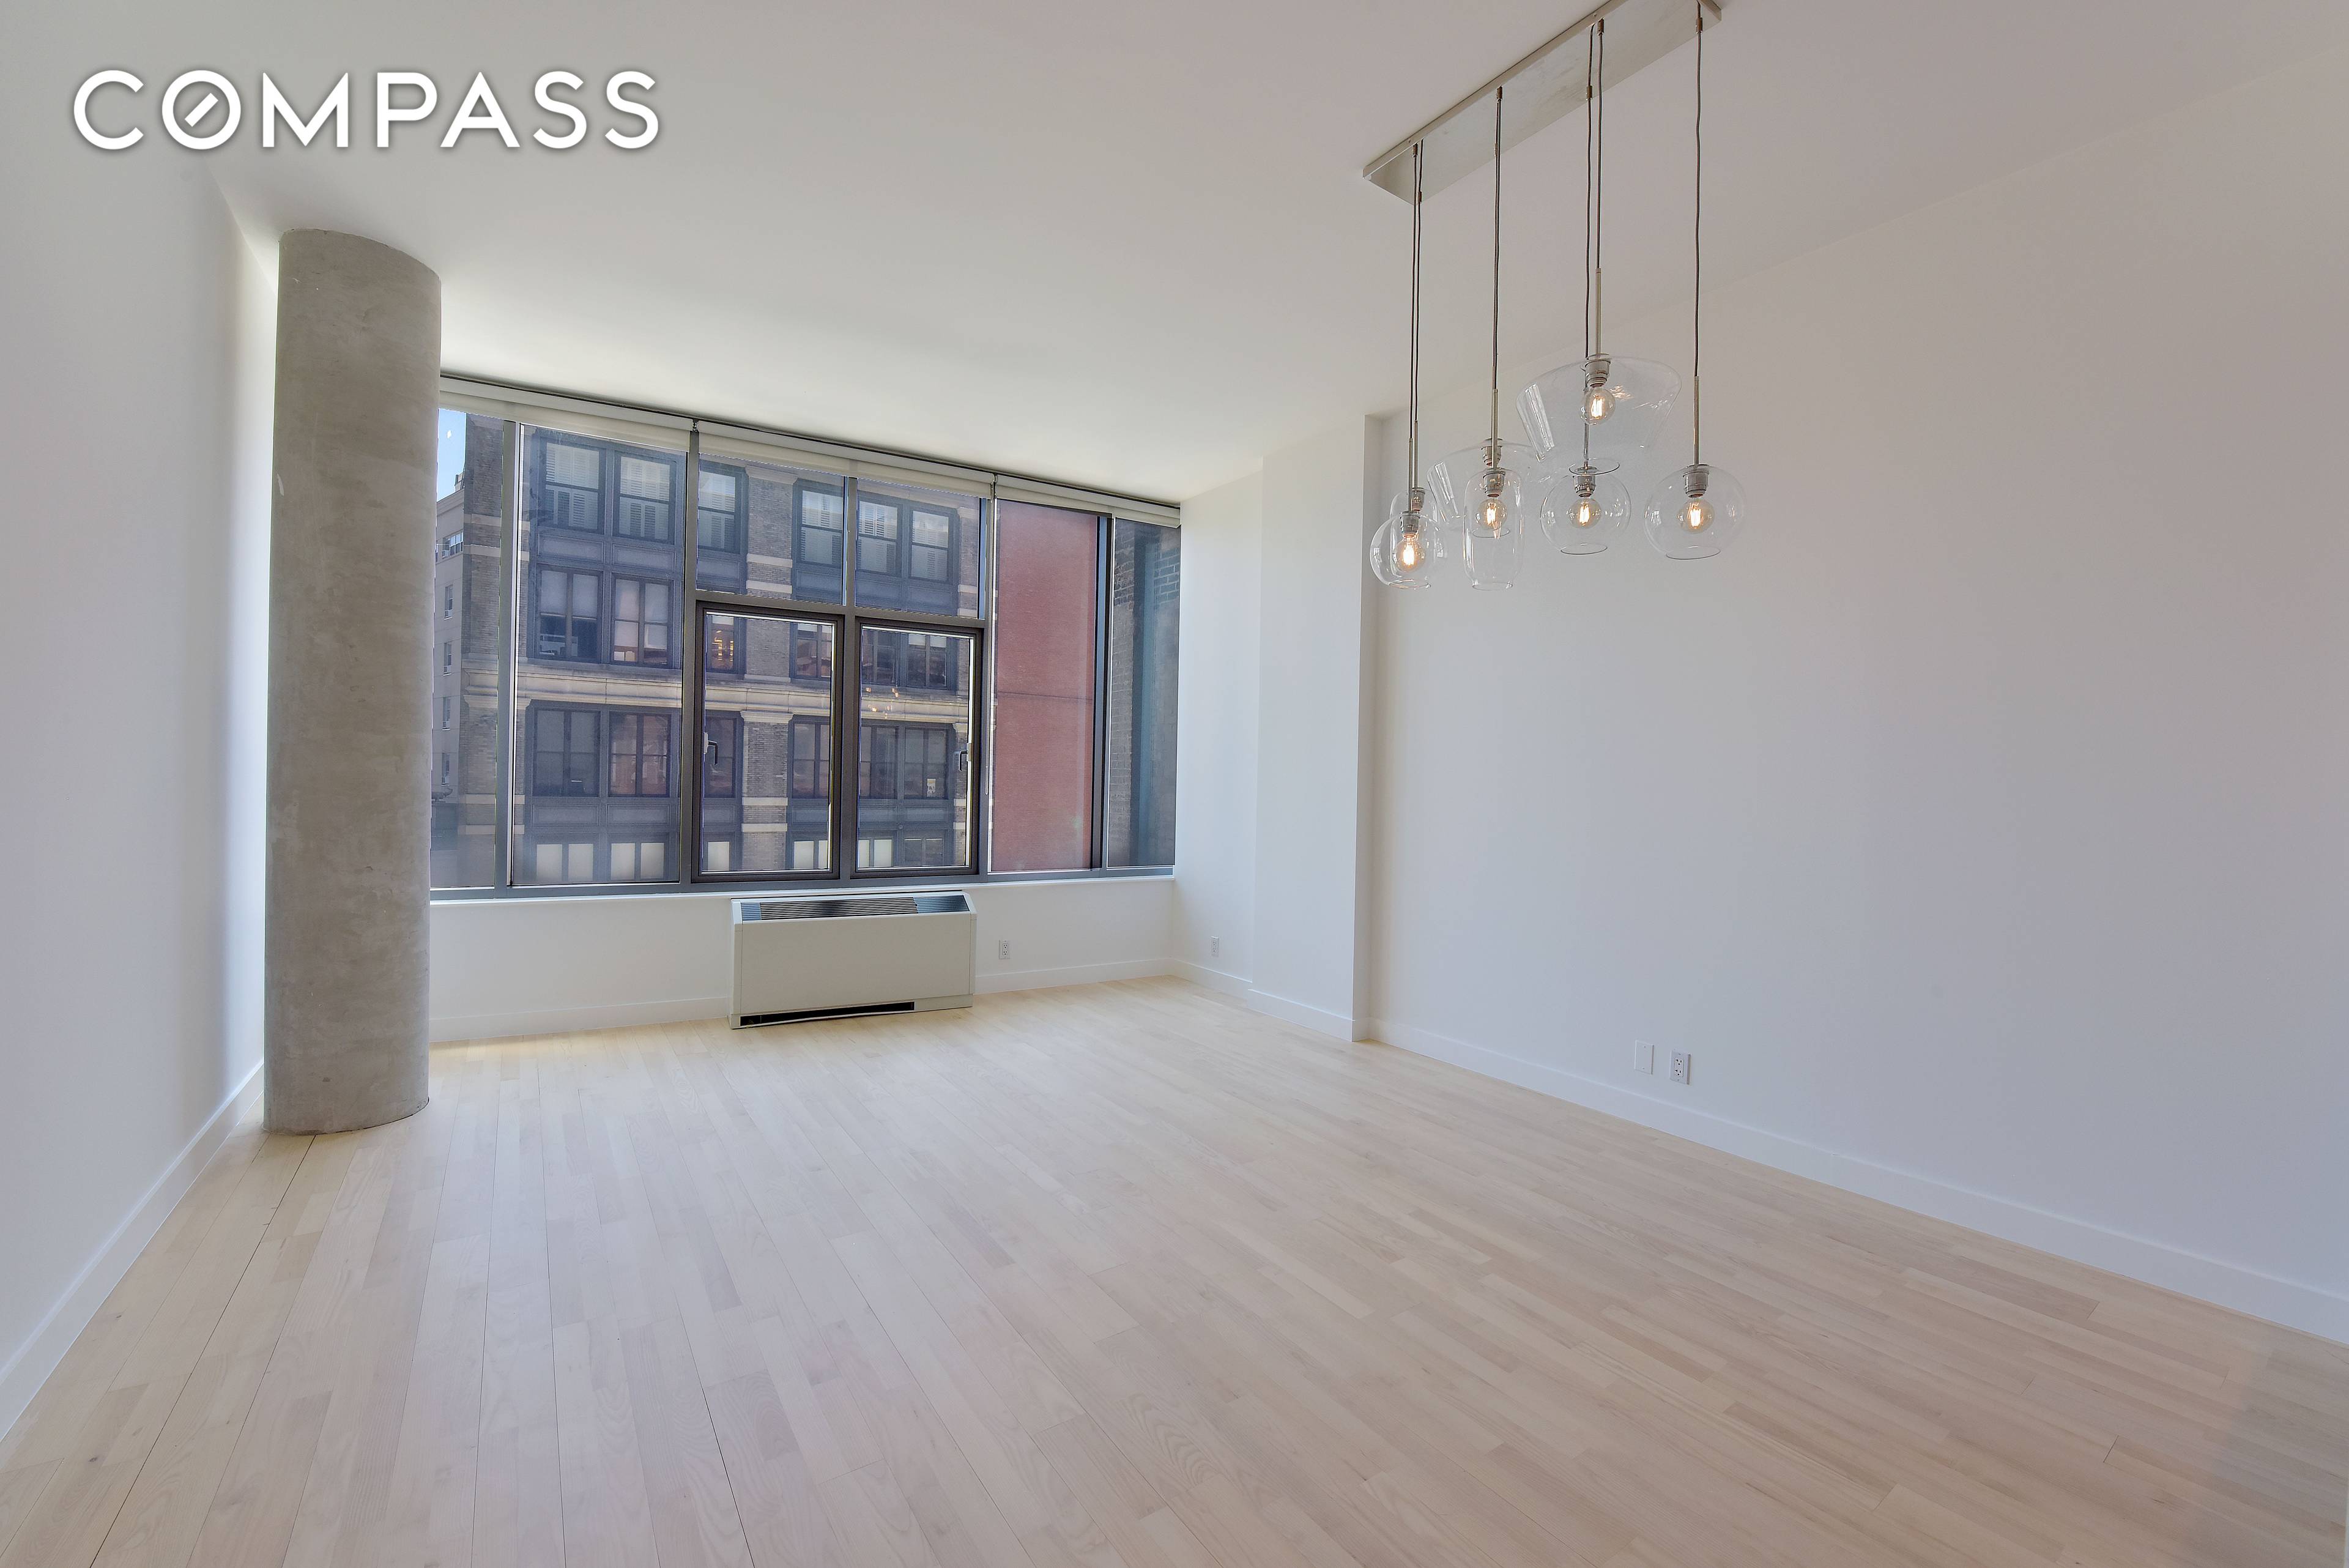 Situated on Soho s vibrant east end overlooking Nolita, this loft style apartment has everything you ve been looking for amazing natural light, high ceilings, fantastic room proportions, and an ...